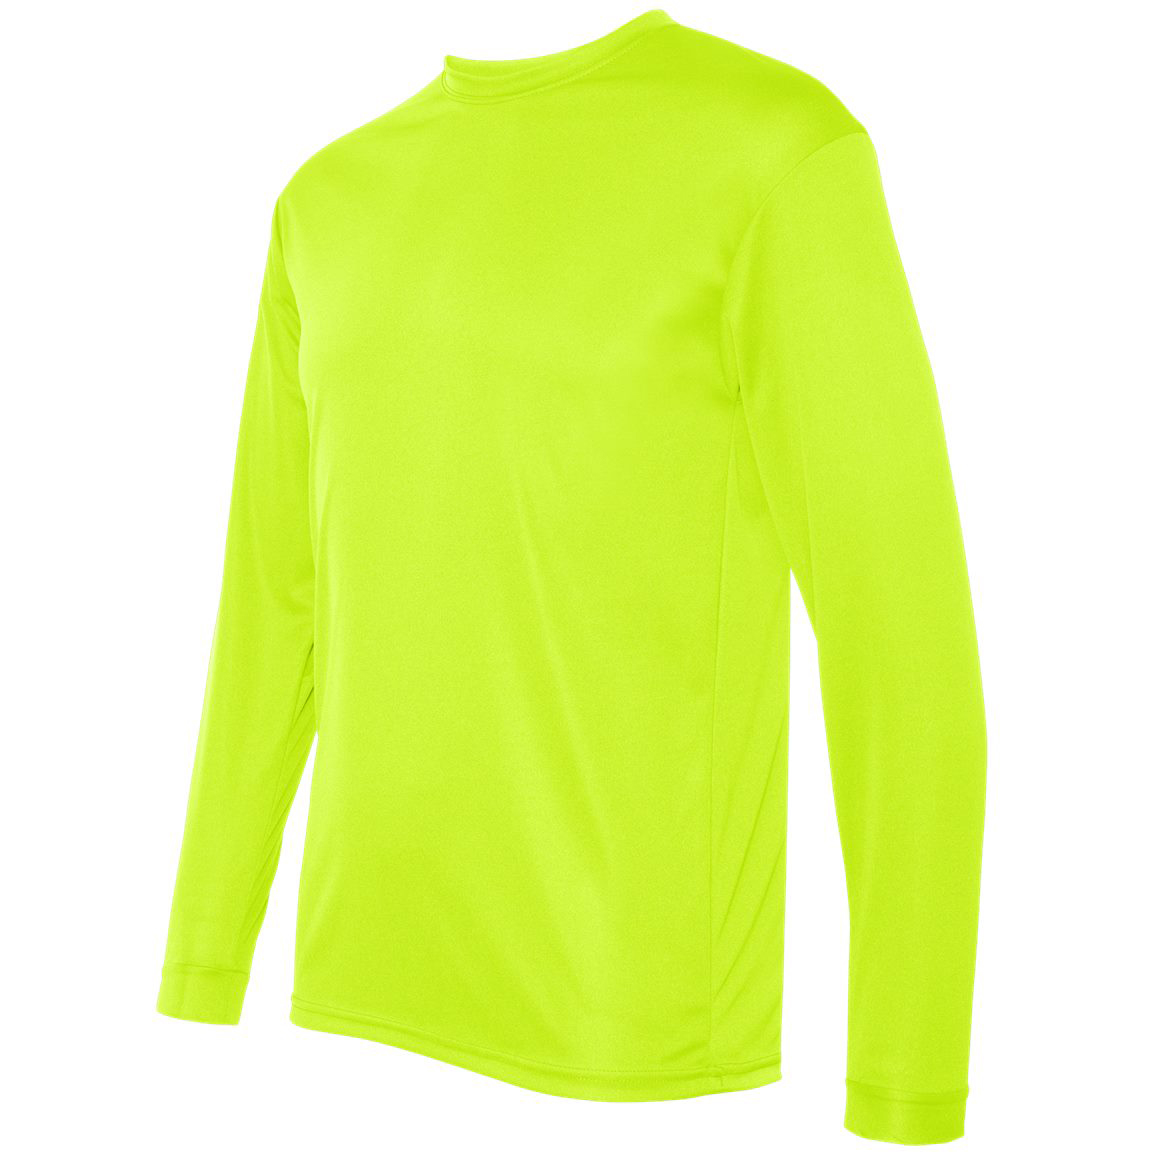 C2 Sport 5104 Performance Long Sleeve T-Shirt - Safety Yellow ...